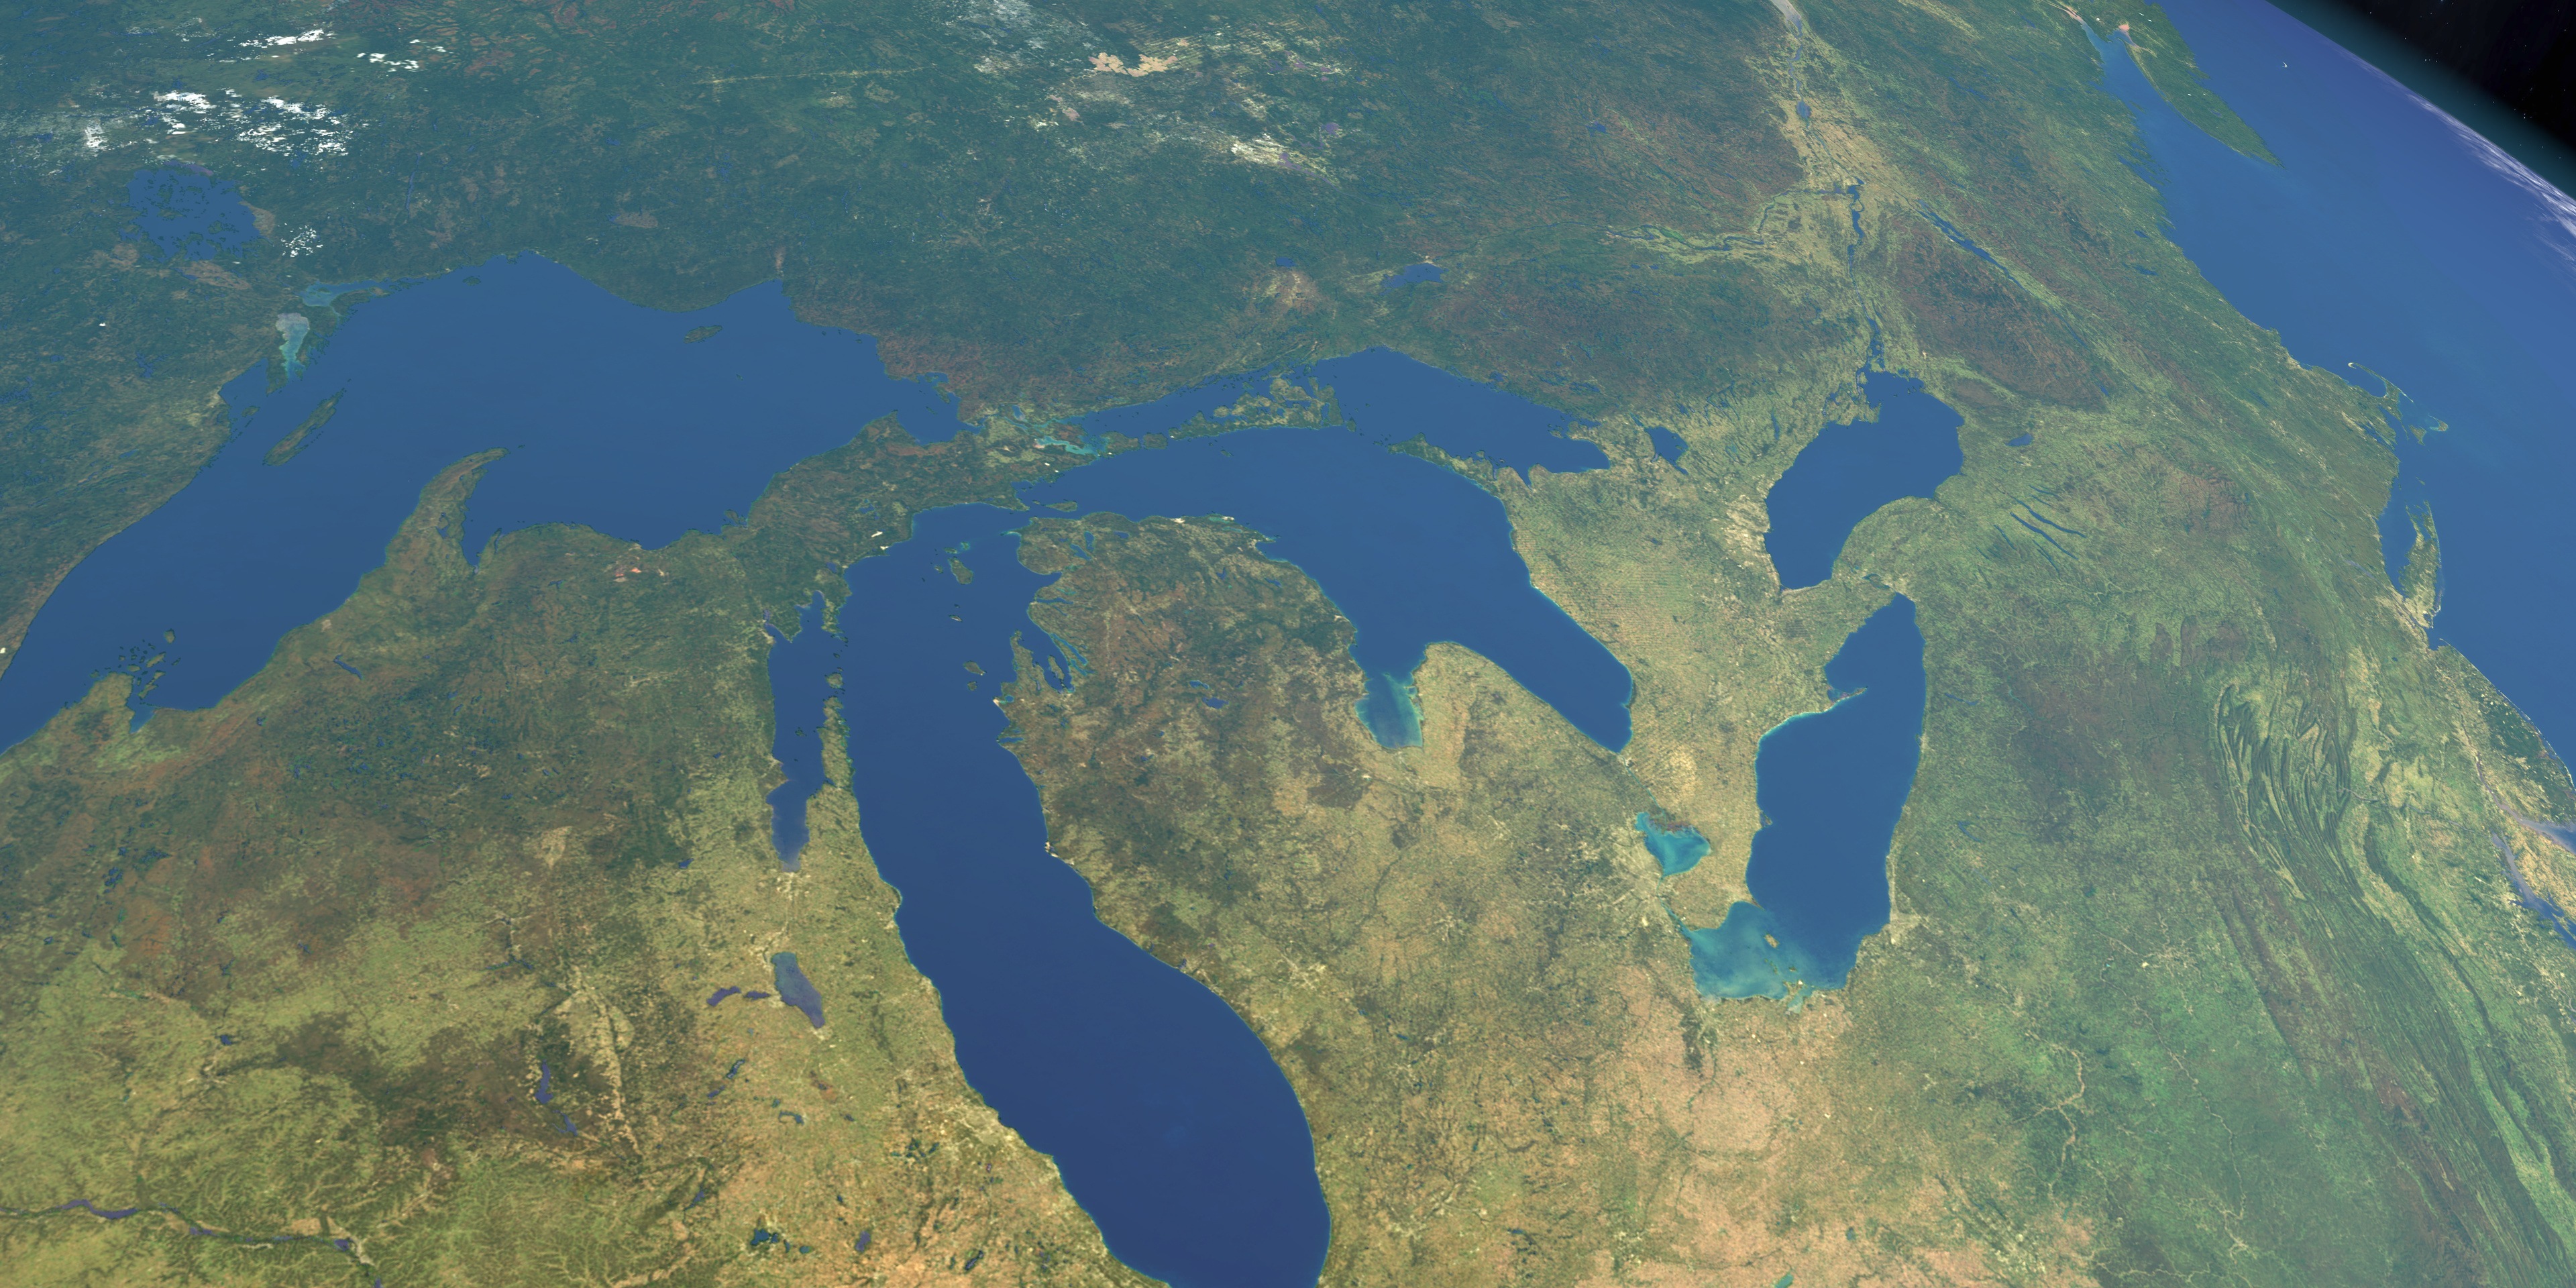 Great lakes in America on planet Earth